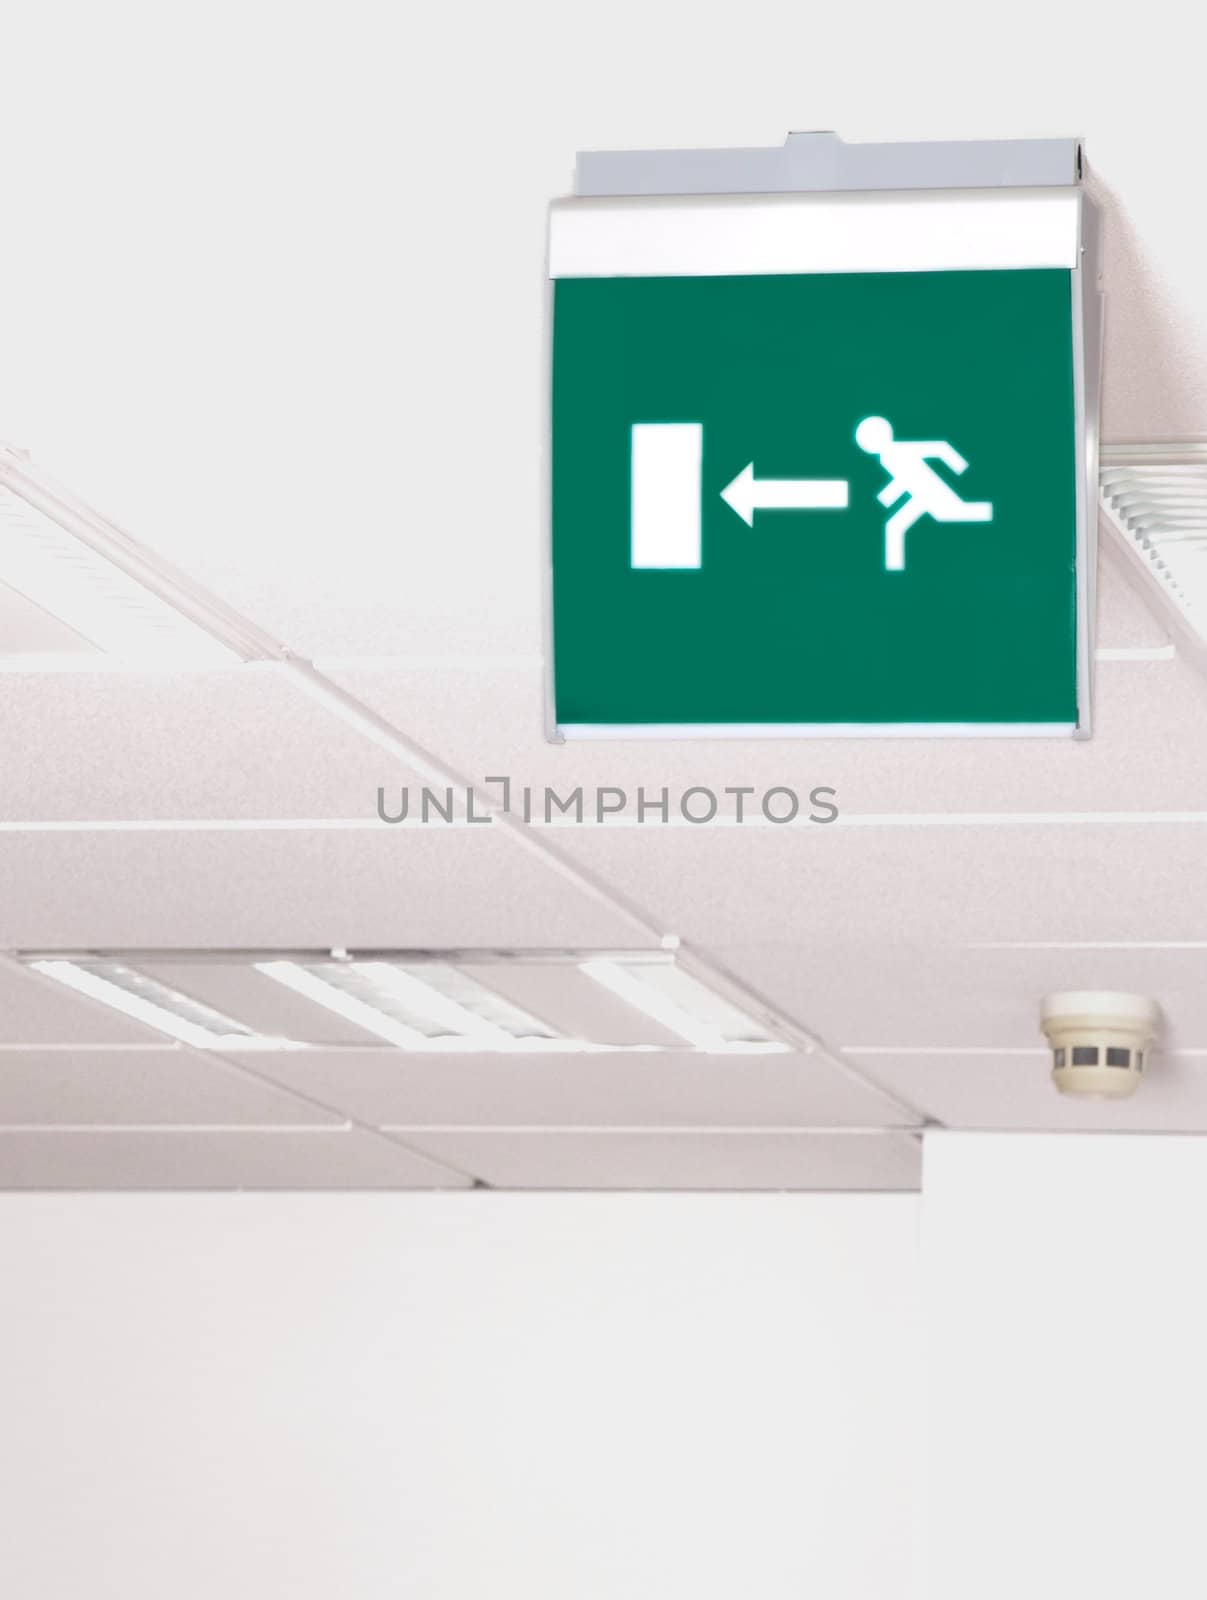 Emergency exit, green sign in the sealing, isolated towards white